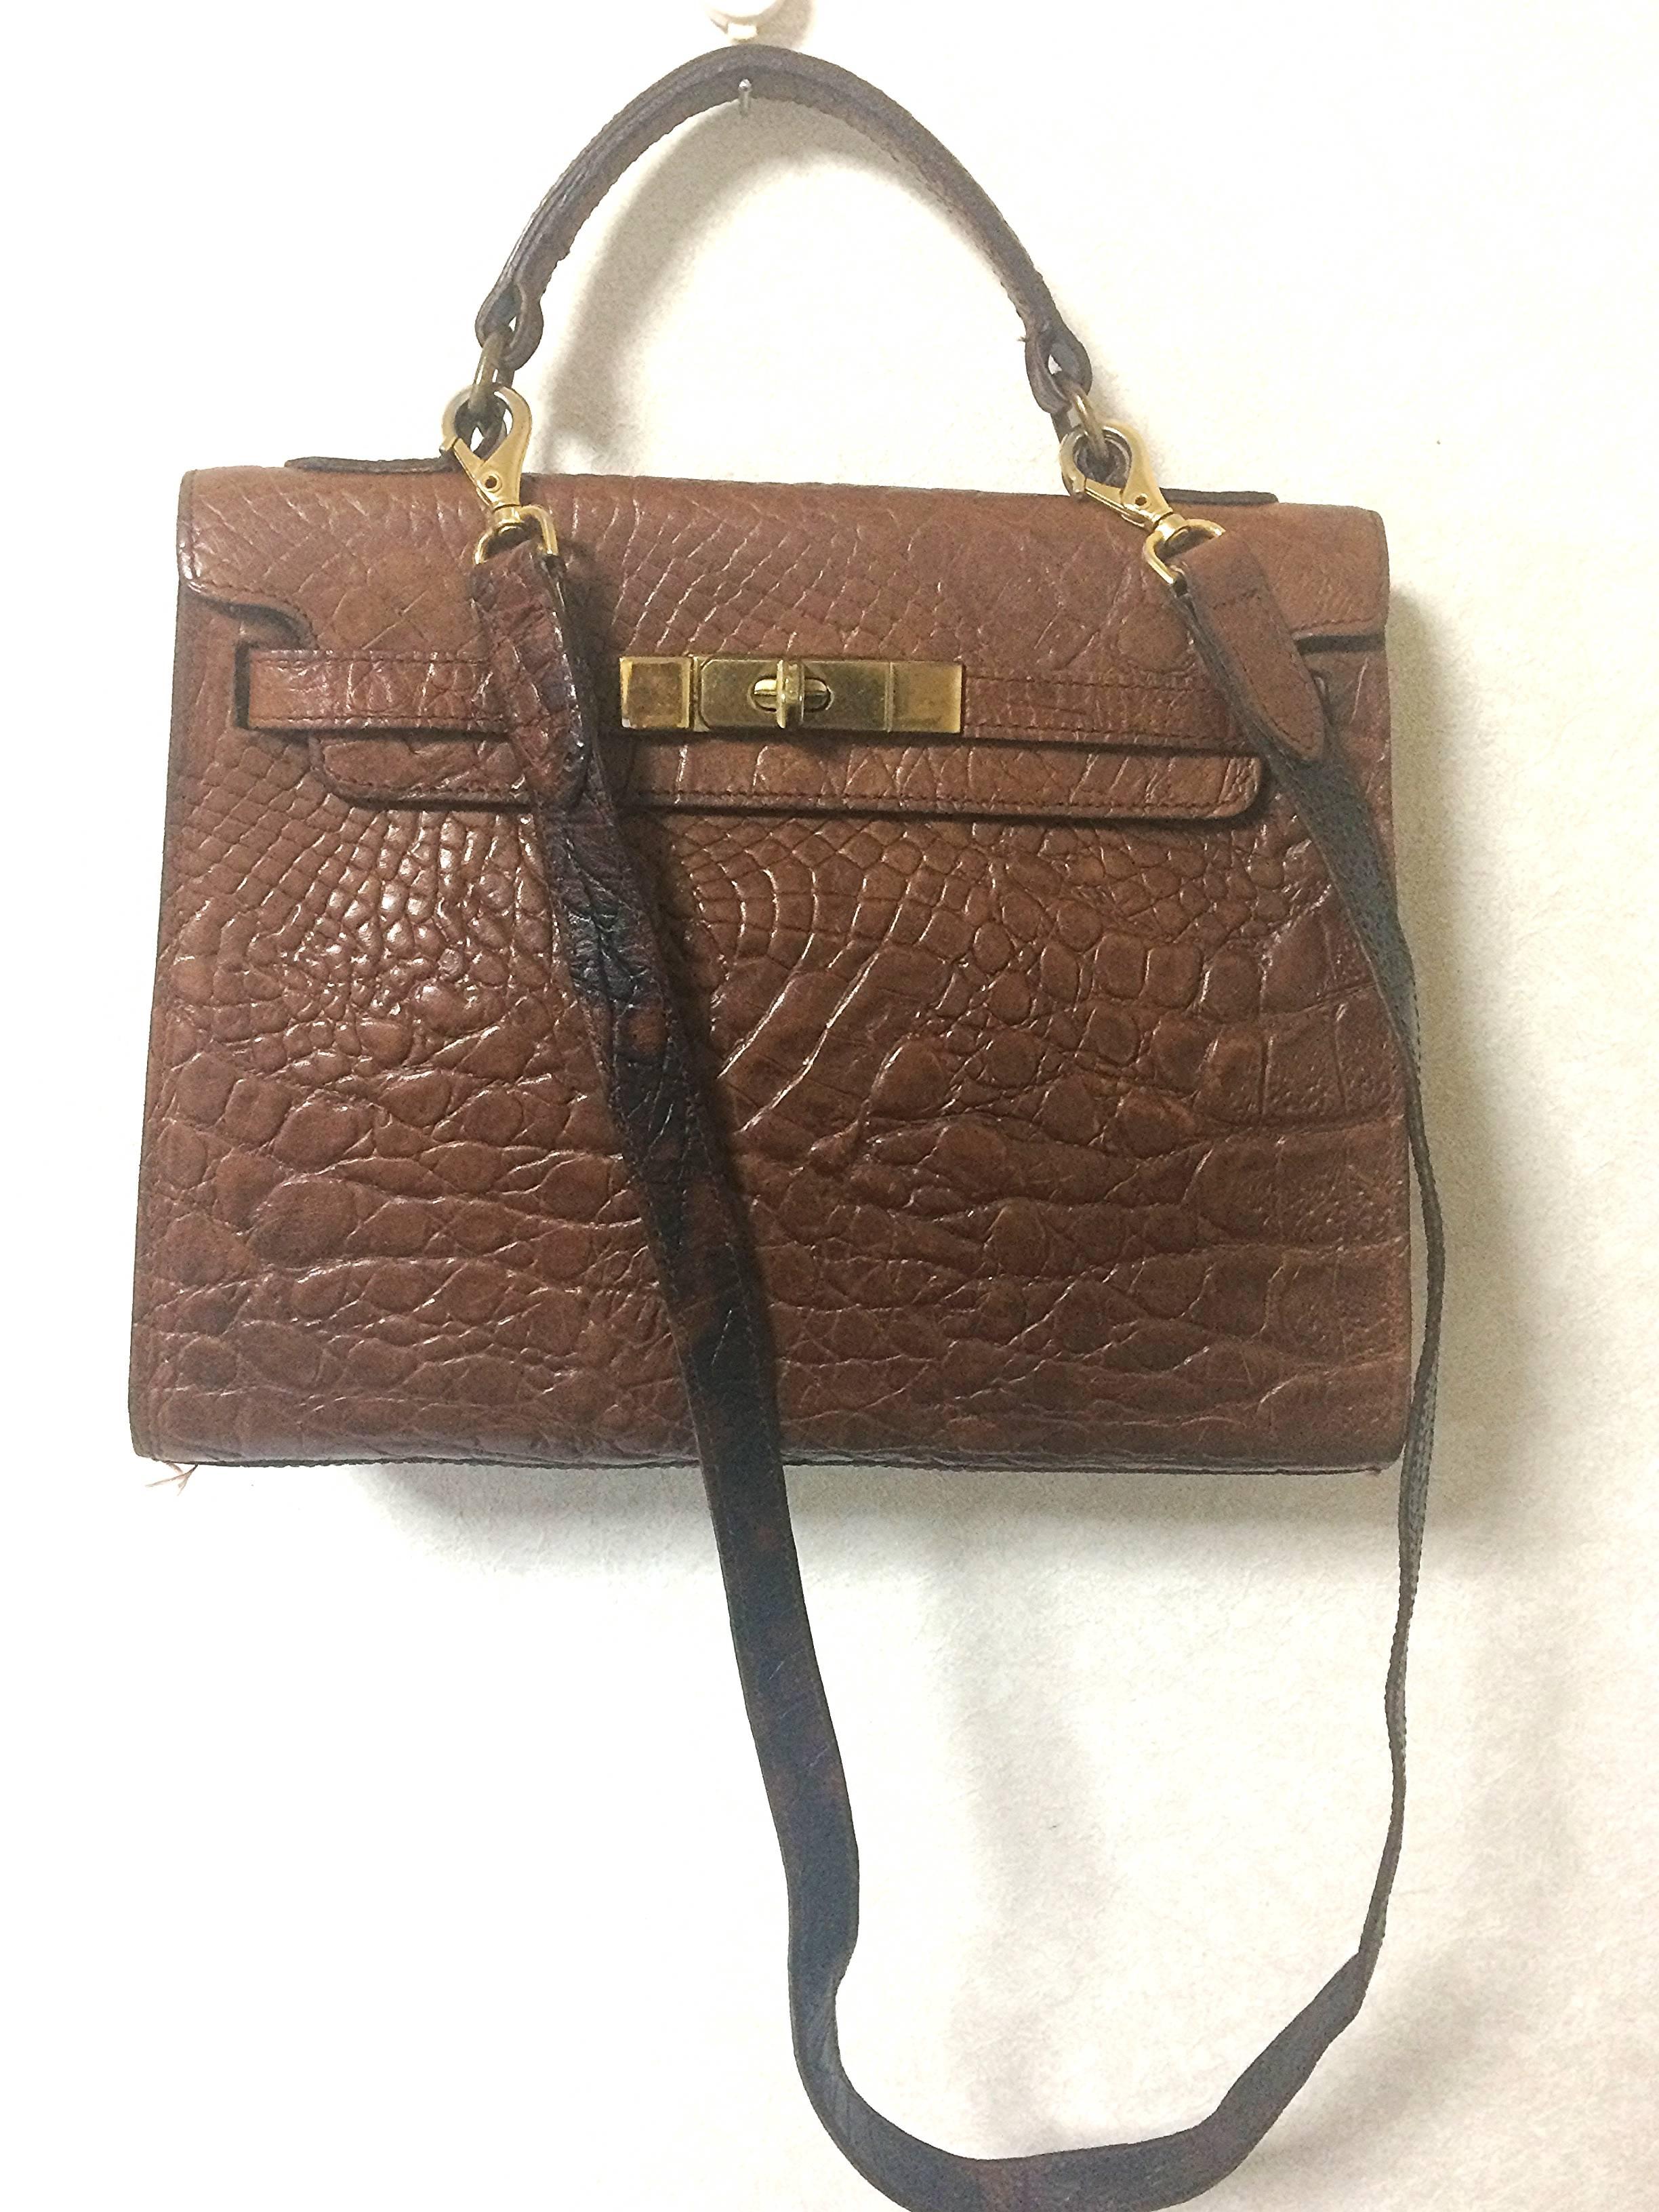 1990s. Vintage Mulberry croc embossed brown leather Kelly bag with shoulder strap. Roger Saul era. Rare masterpiece you must get.

Introducing another old sophisticated masterpiece from Mulberry in the Roger Saul era in the early 90's.

It has